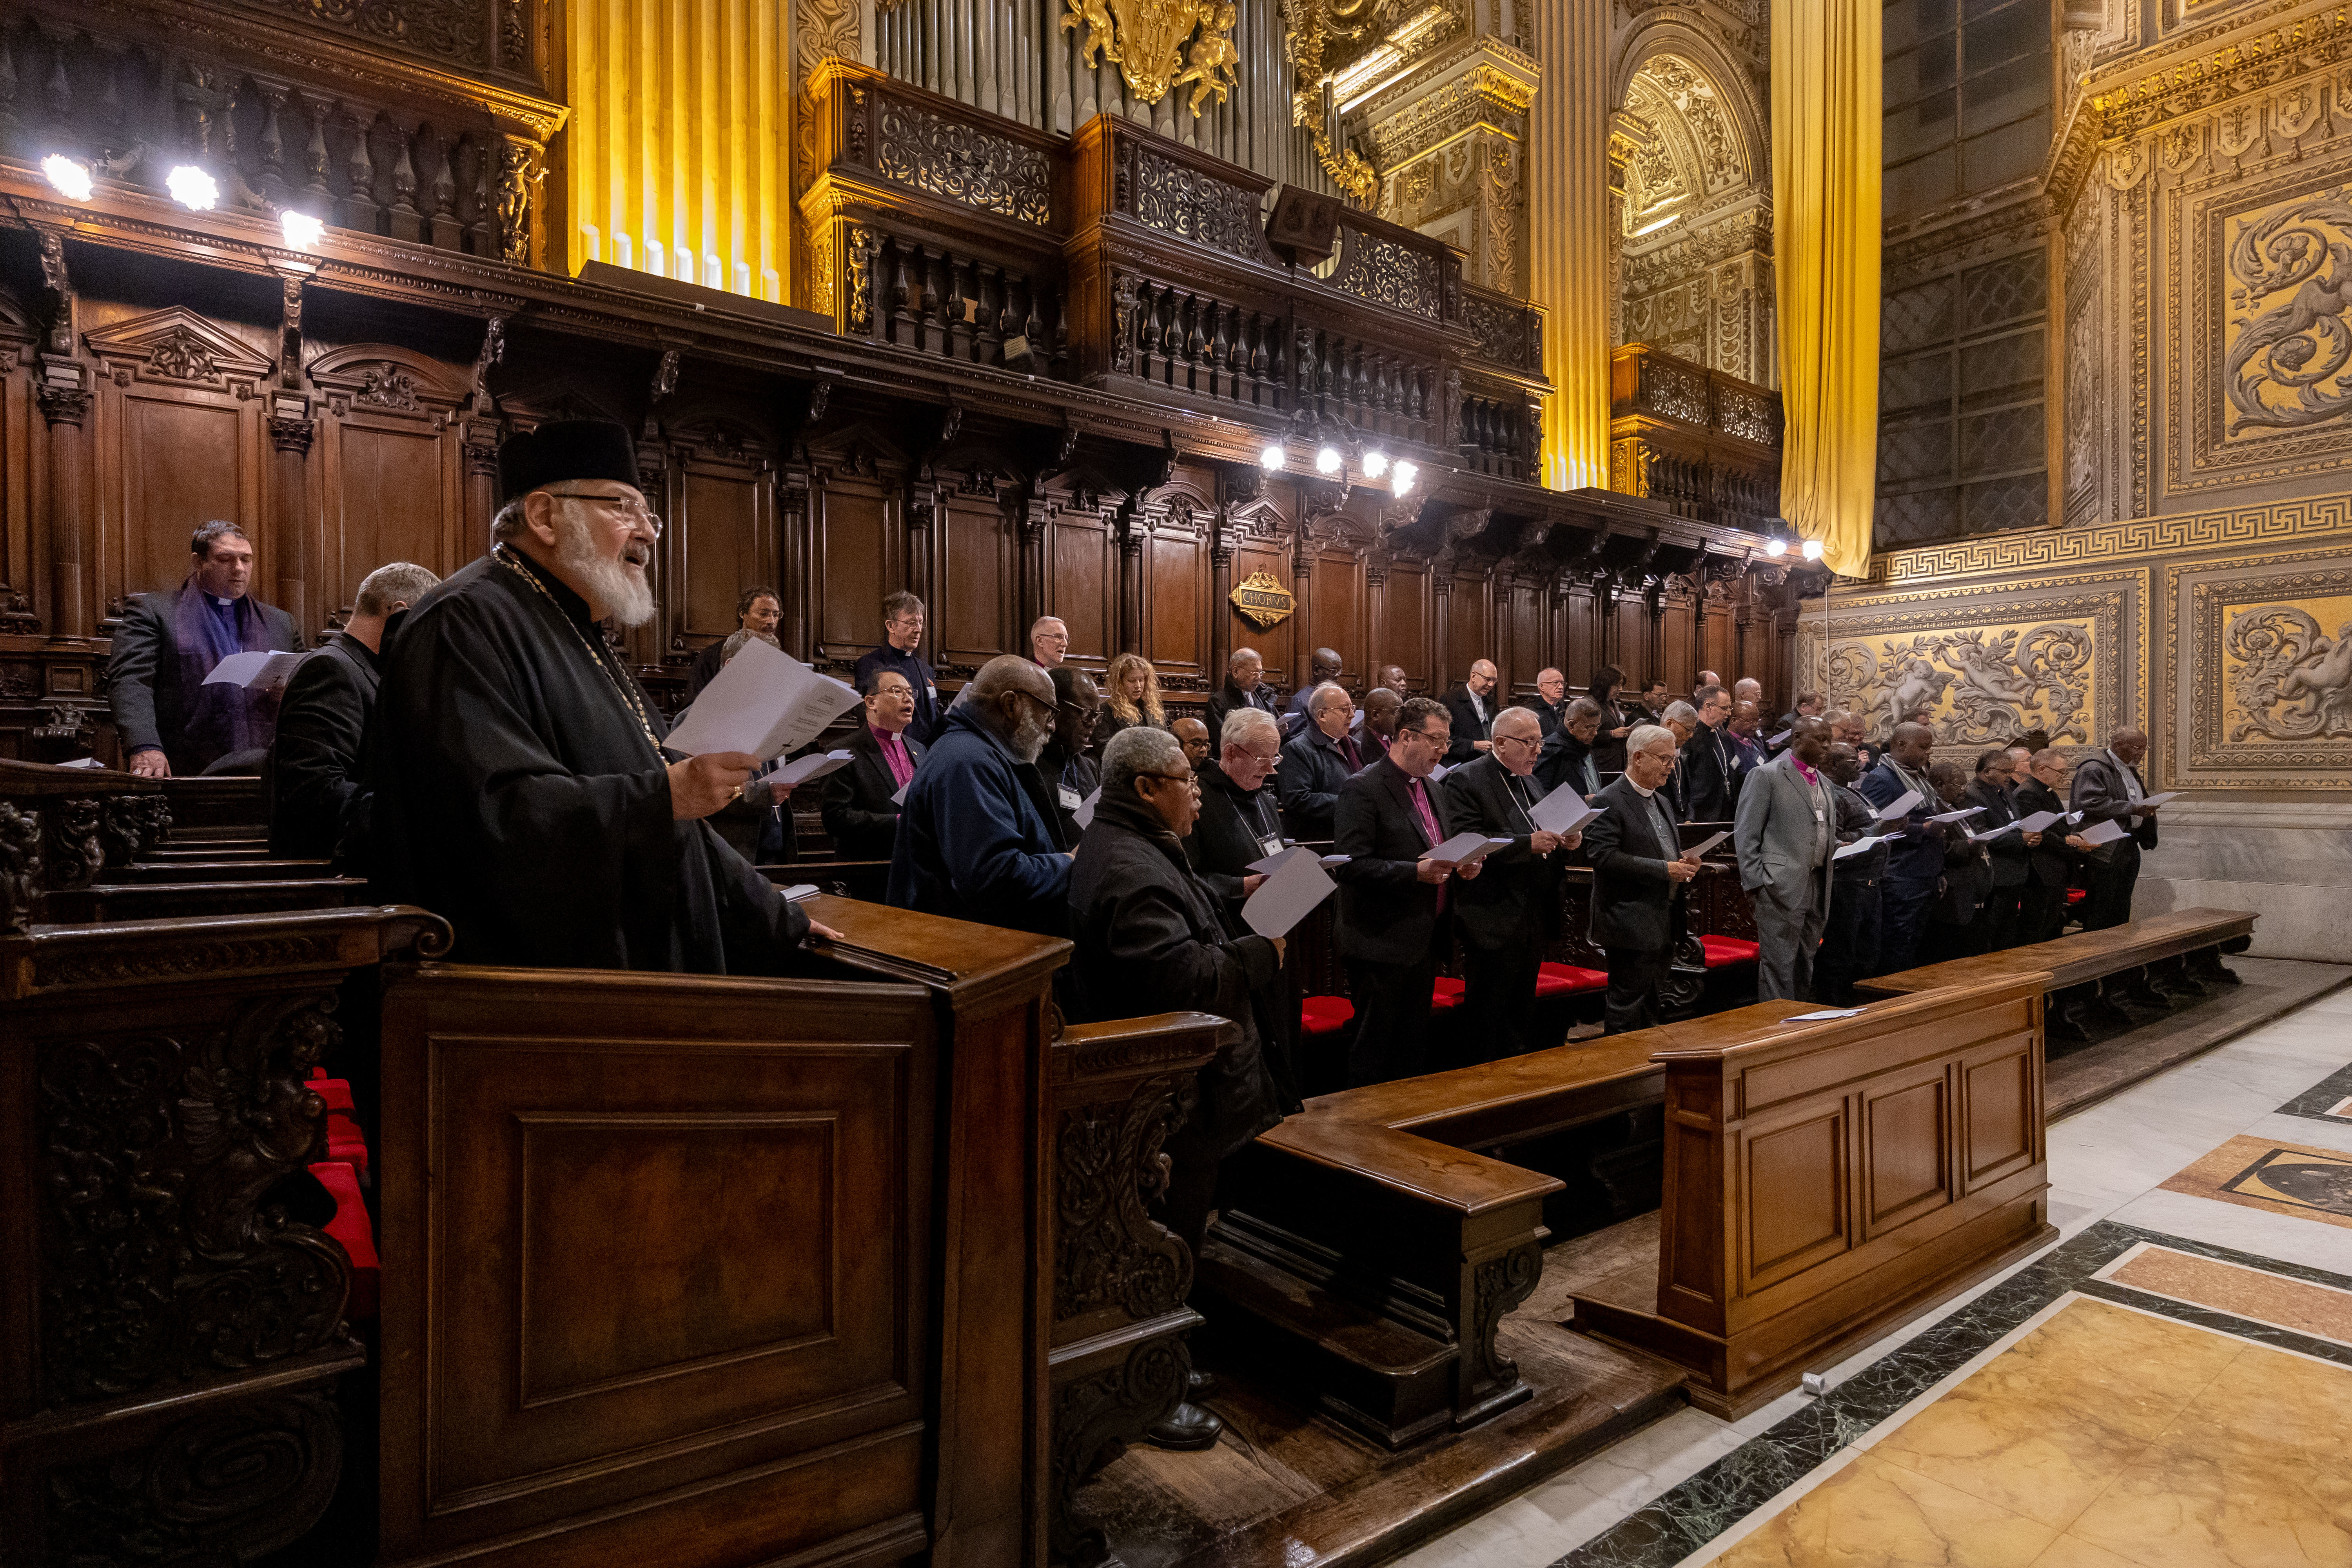 St Peter’s hosts Anglican evensong for ecumenical summit